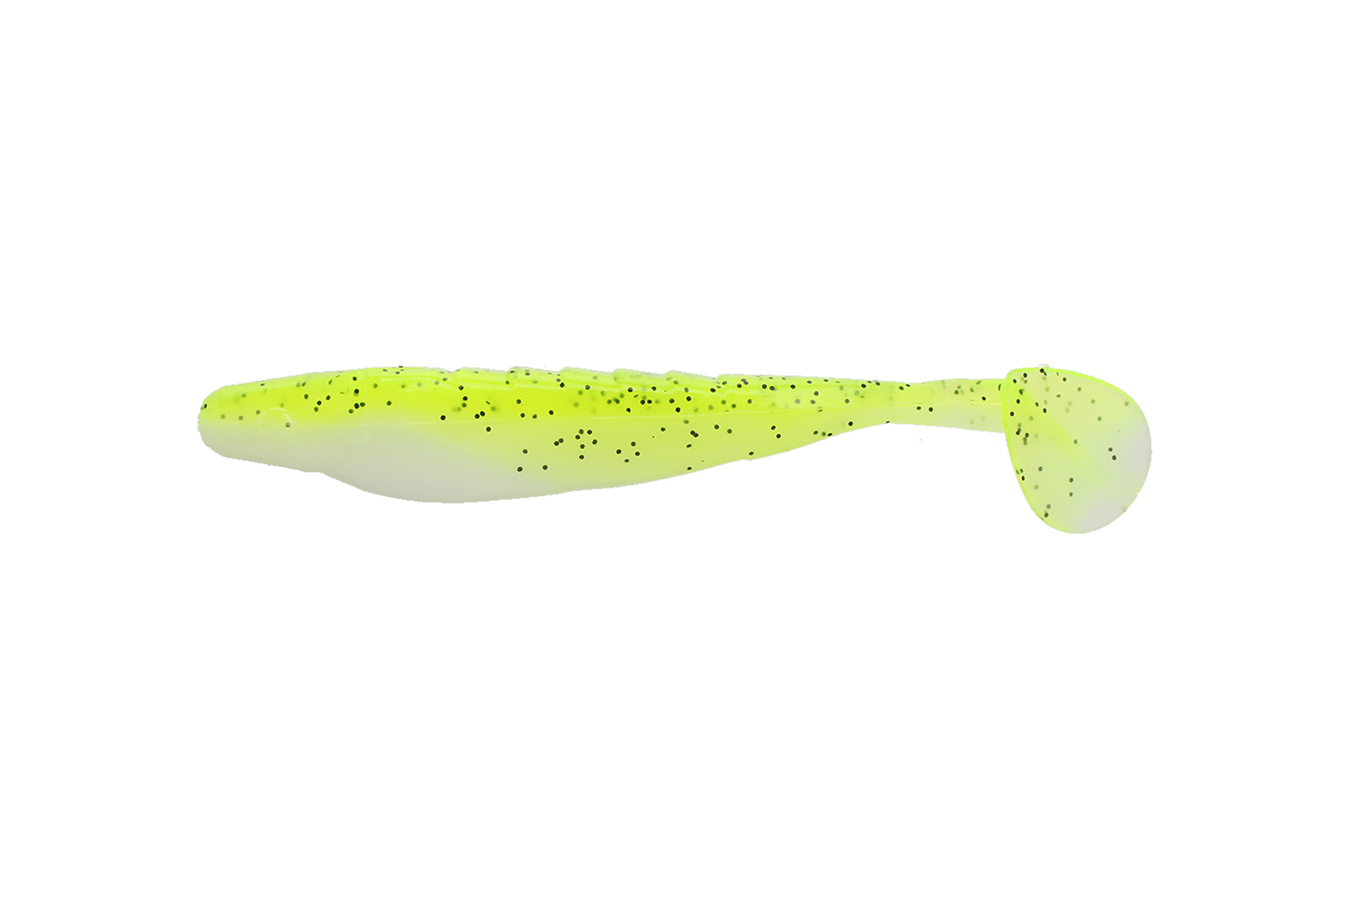 Shockwave 3.5, Chartreuse White